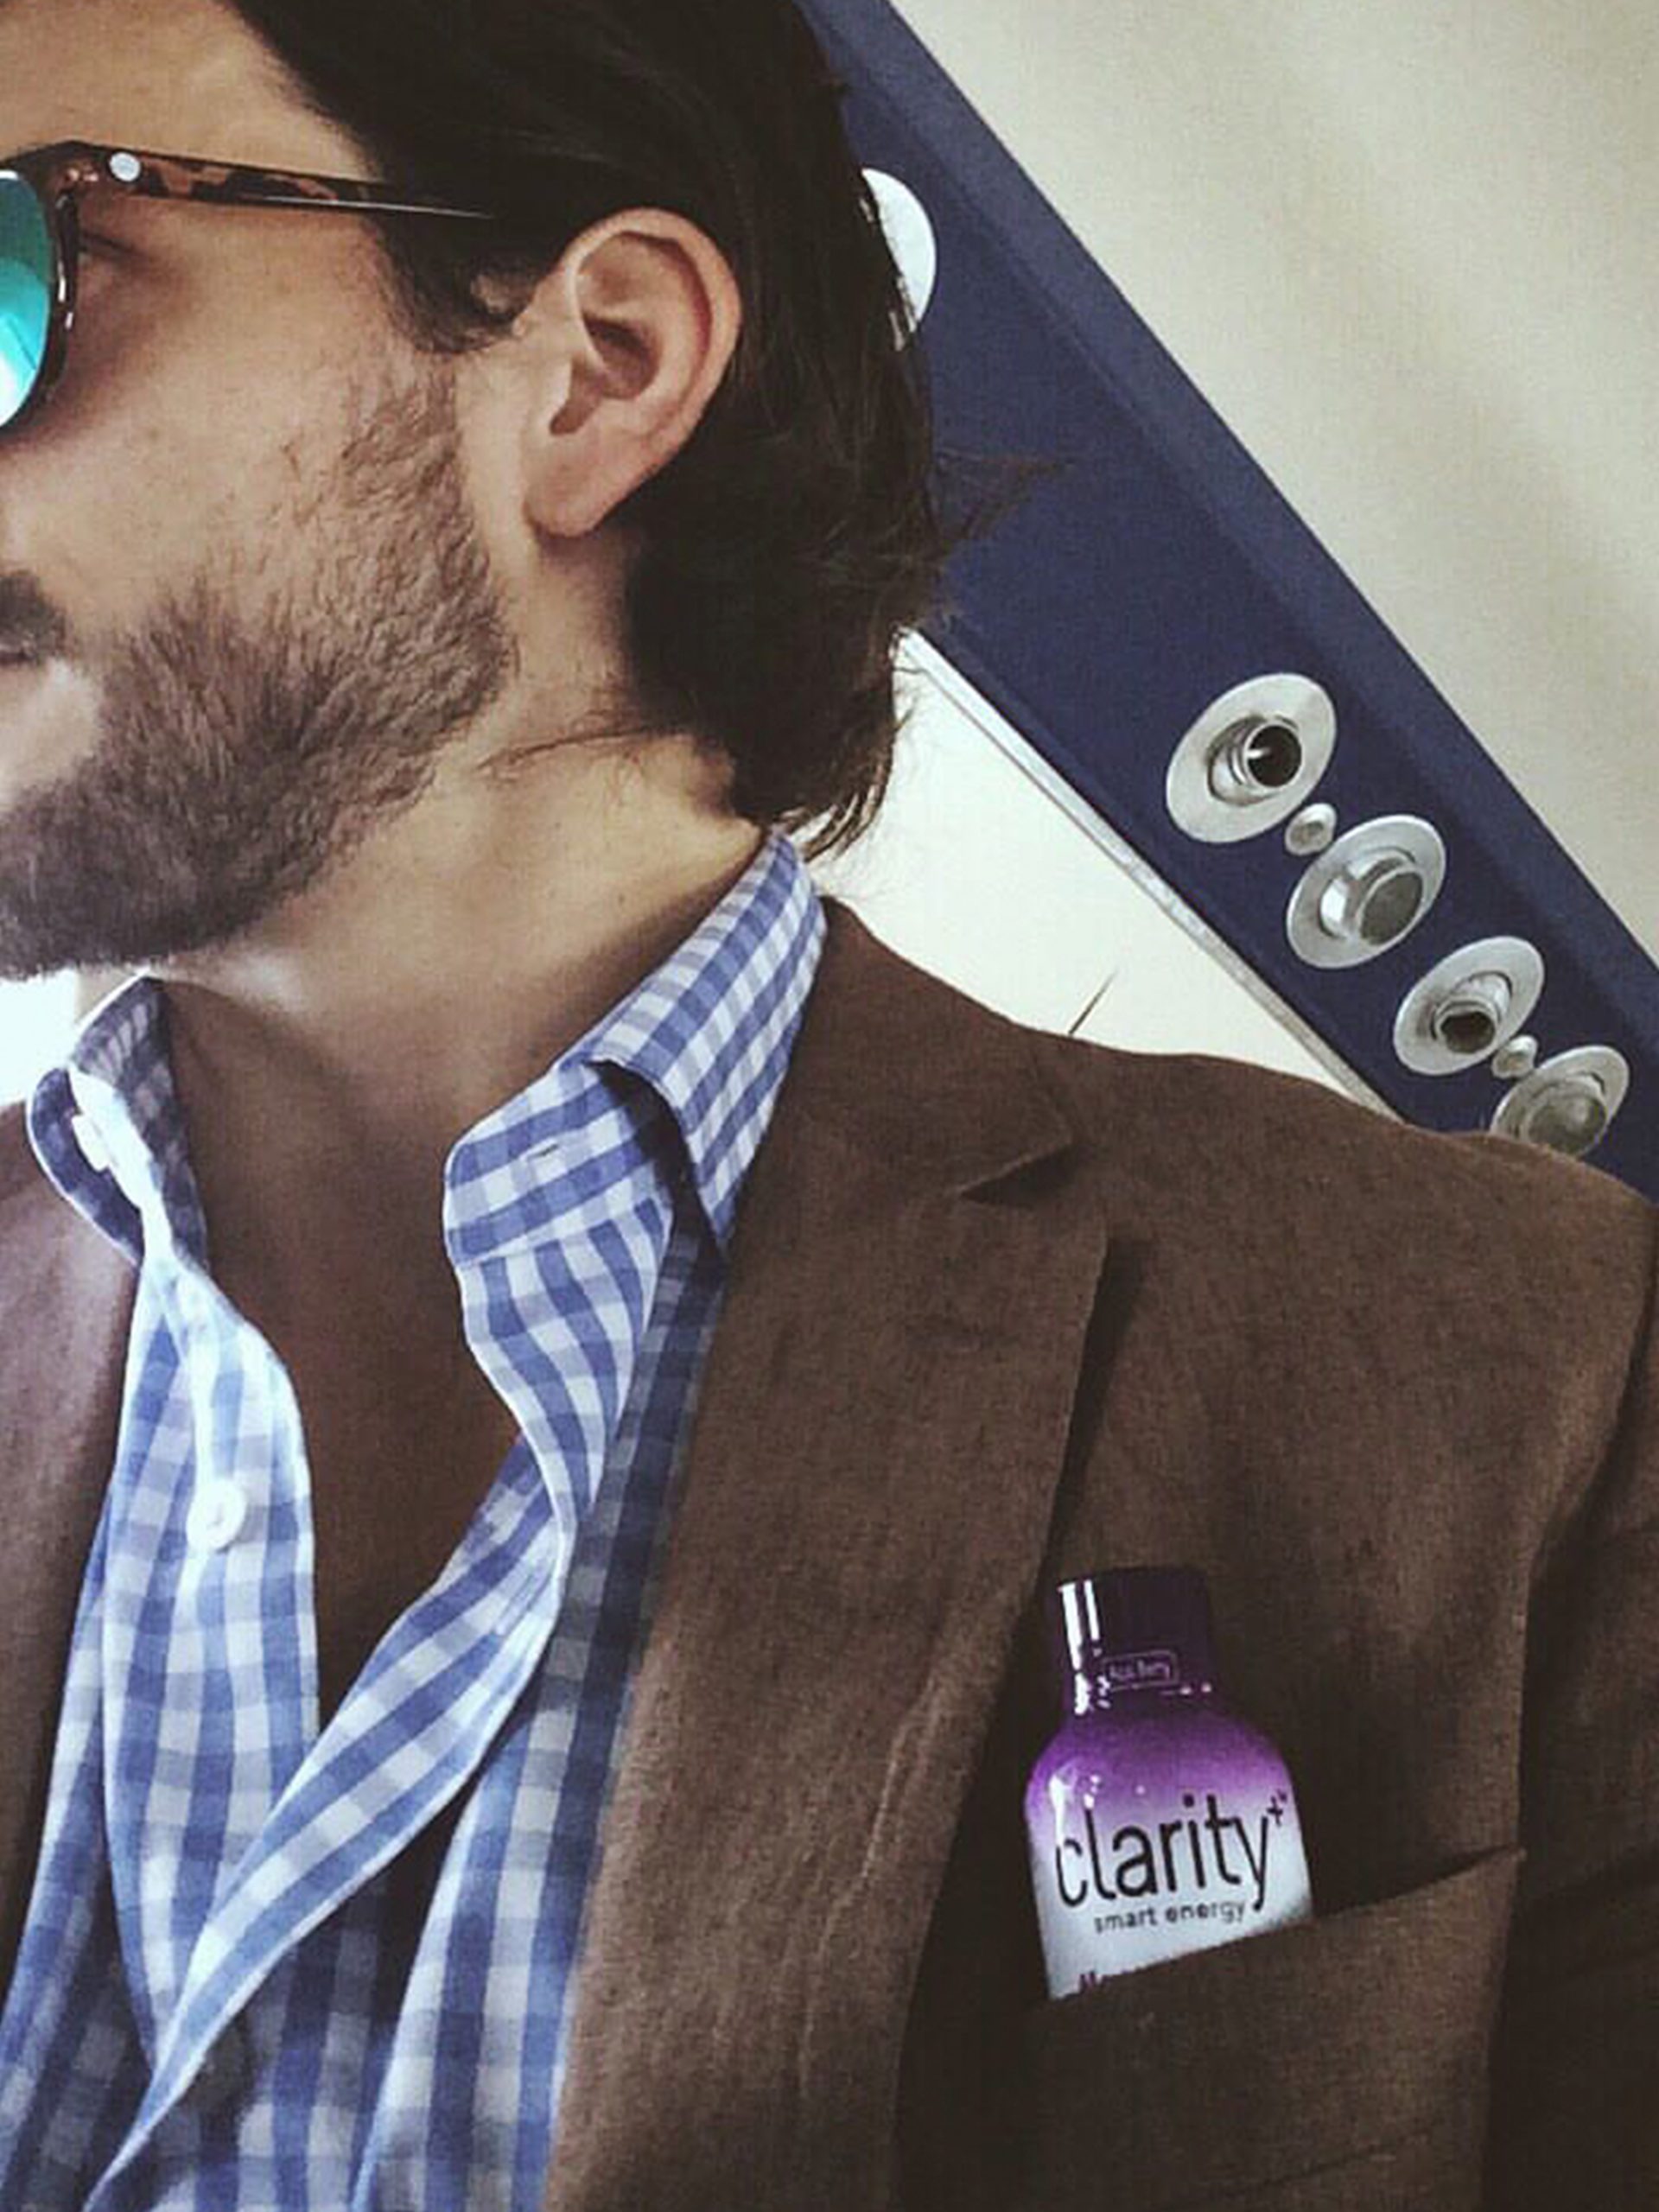 Man with casual outfit having a bottle of Clarity in his pocket